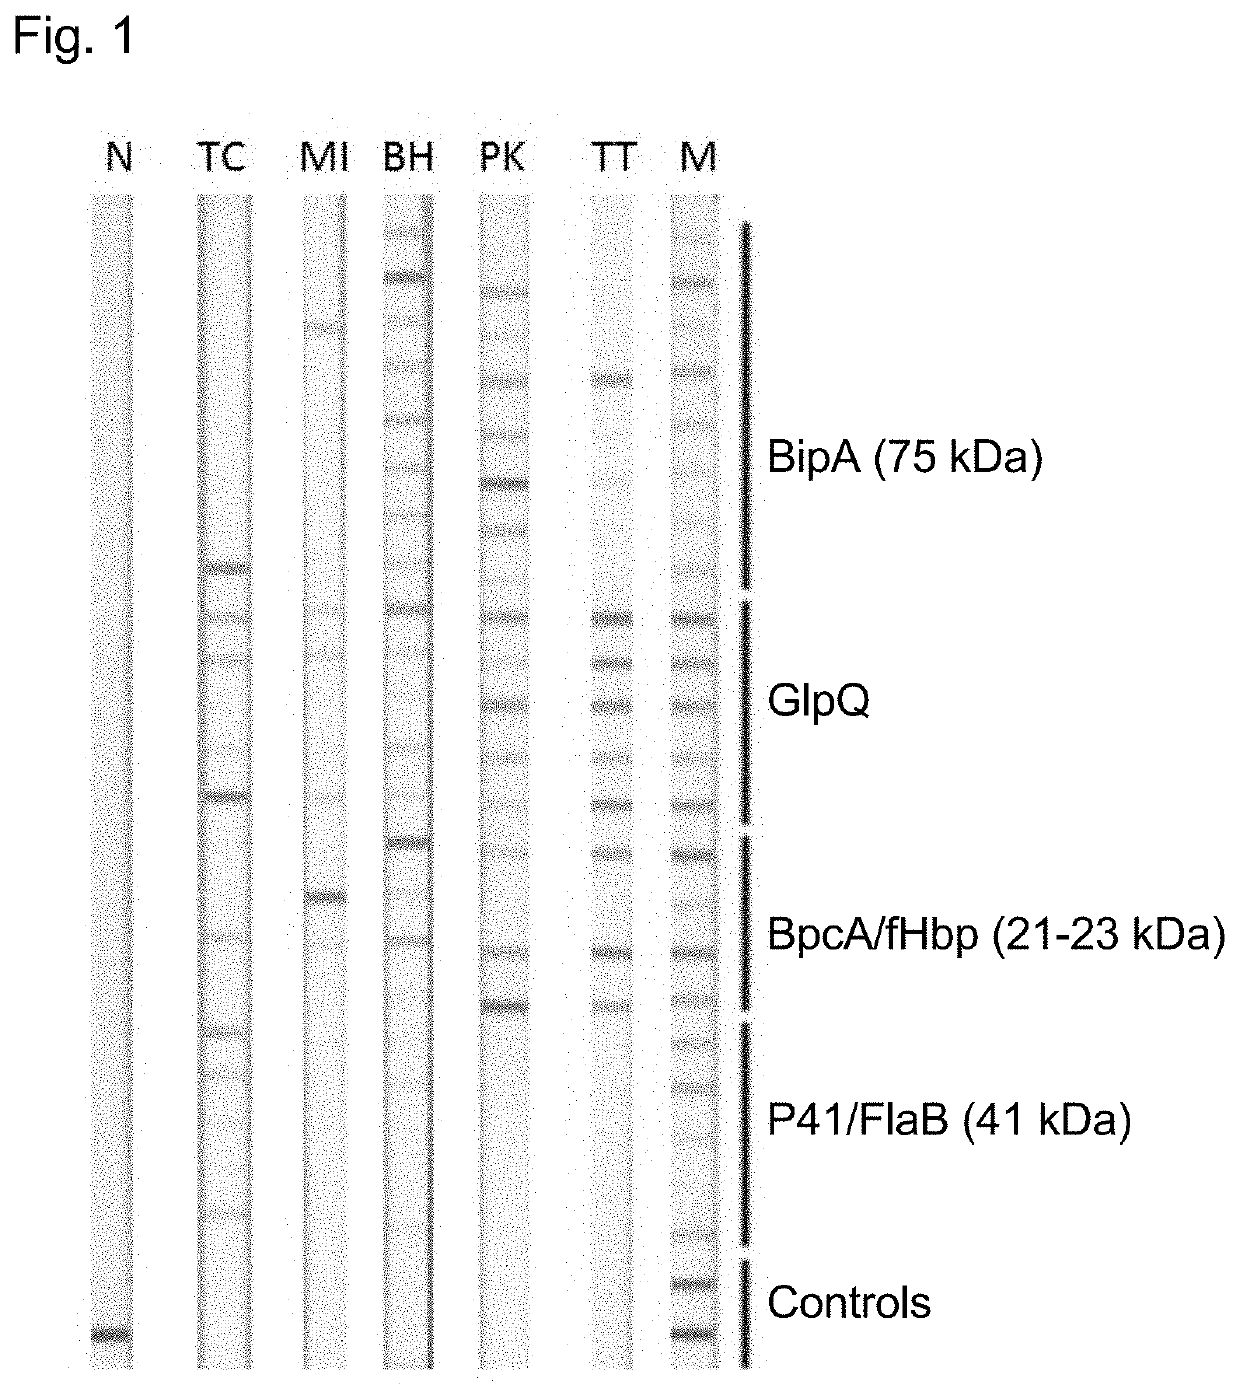 Species-specific antigen sequences for tick-borne relapsing fever (TBRF) and methods of use